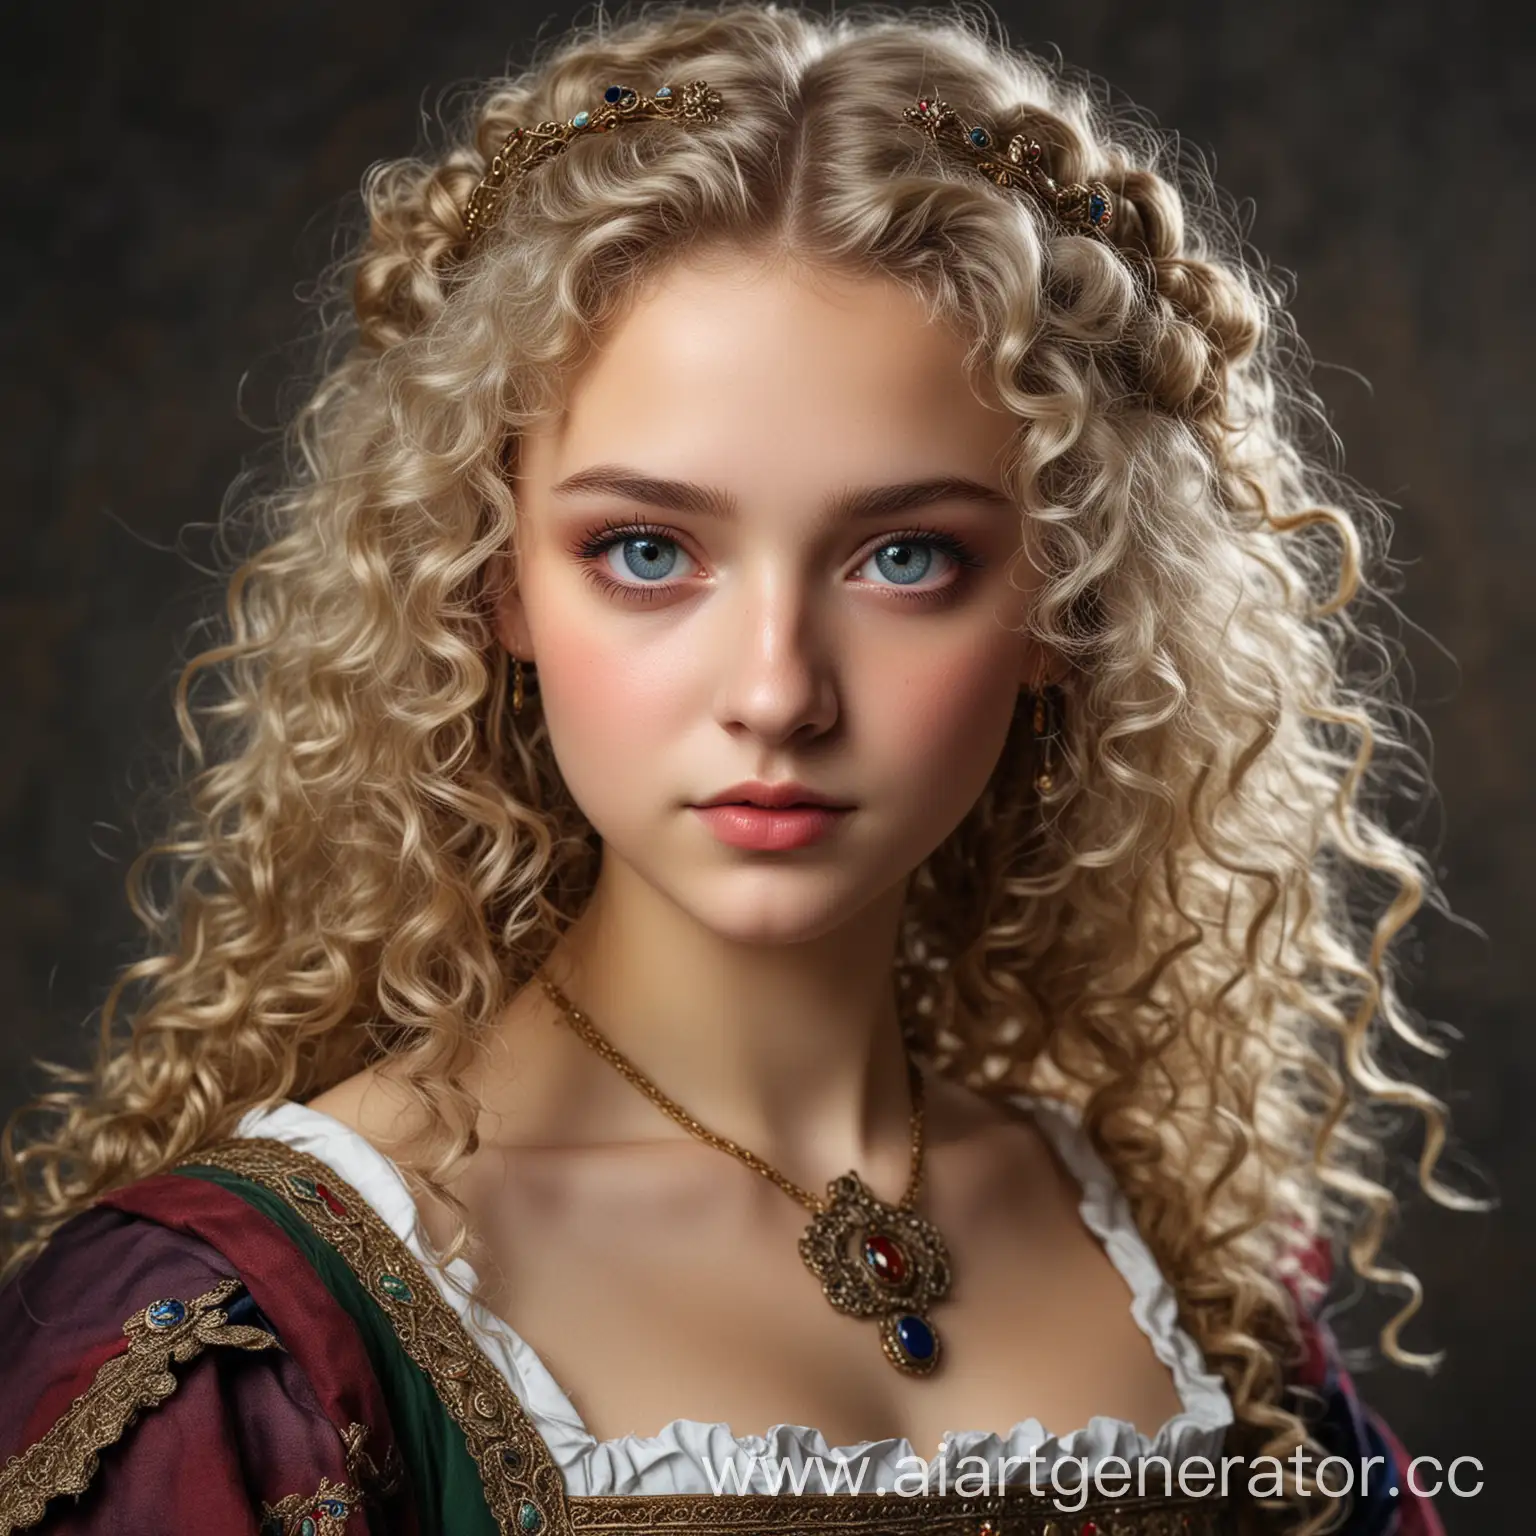 Medieval-Aristocratic-Girl-with-Multicolored-Eyes-and-Curly-Hair